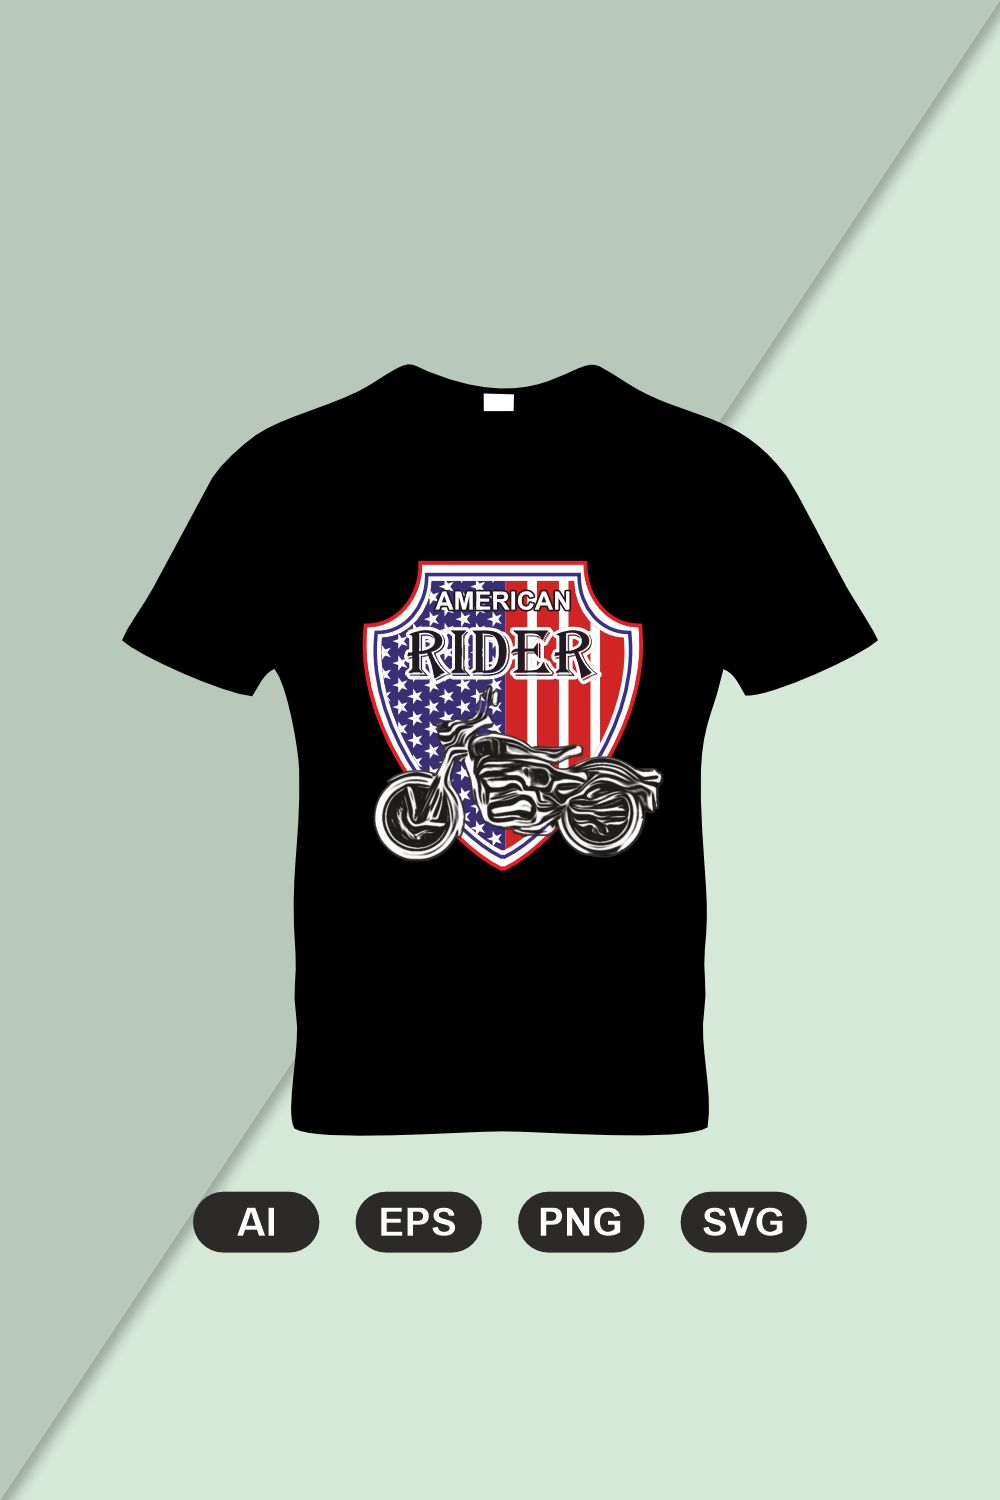 American flag and bike pinterest preview image.